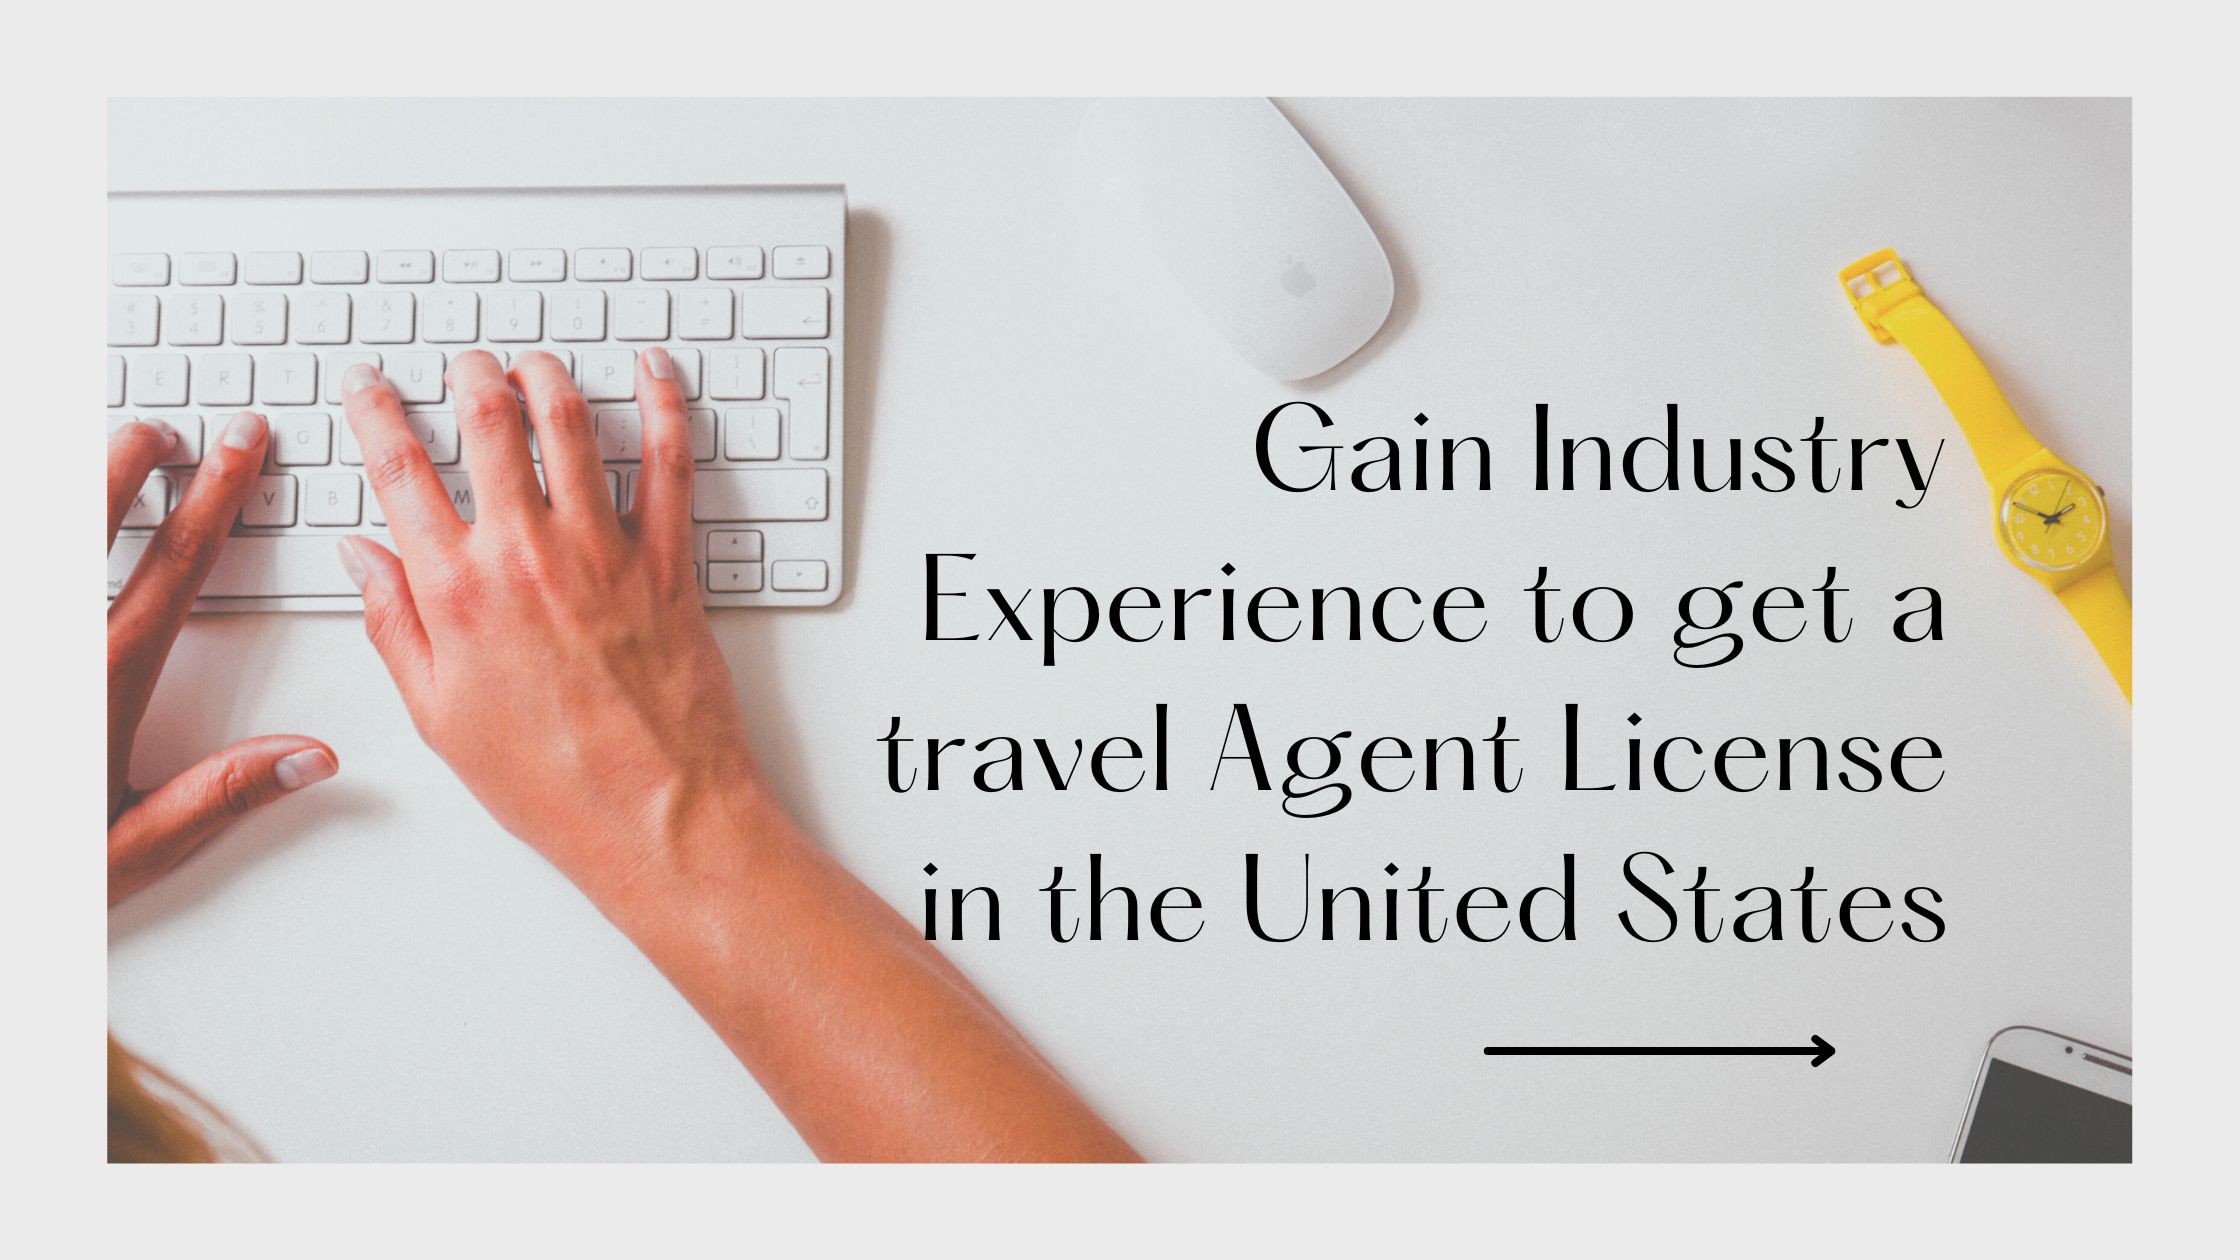 Gain Industry Experience to get a travel Agent License in the United States